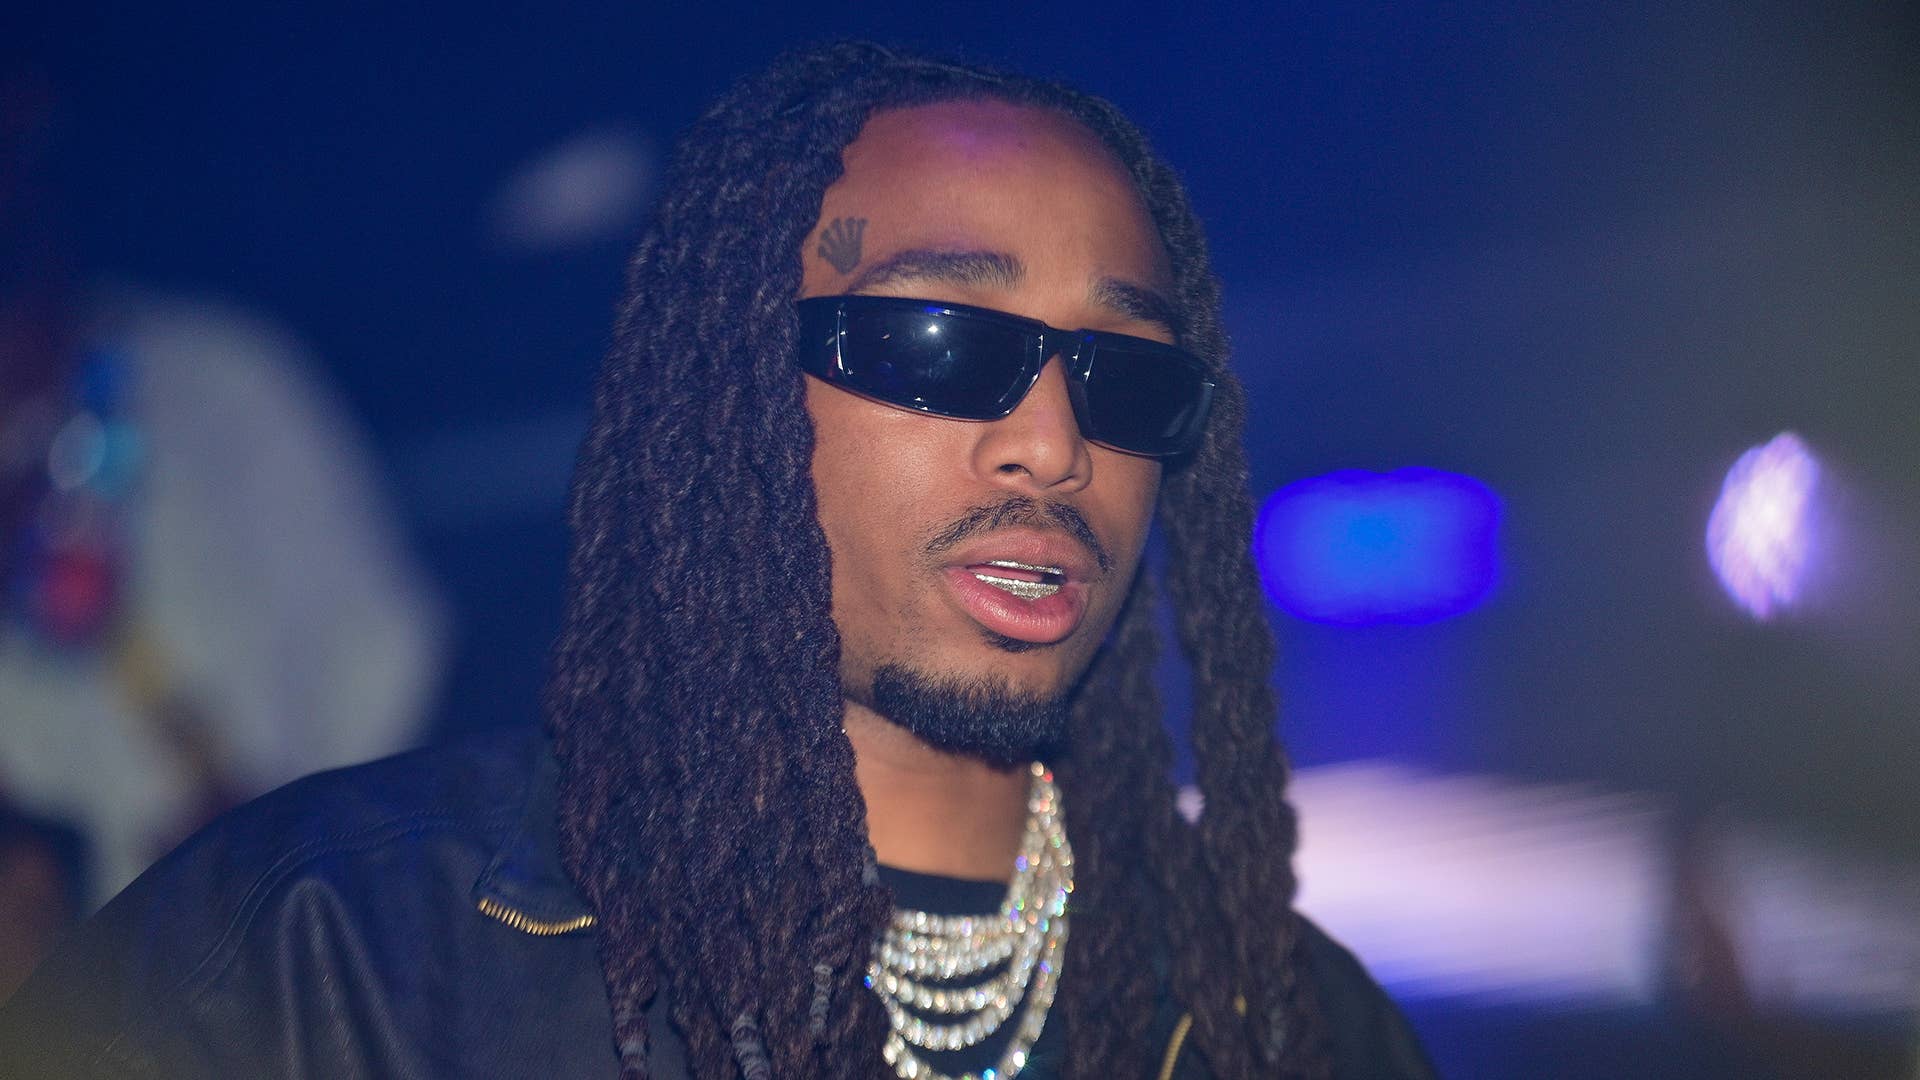 Quavo attends "Unc & Phew" Album Release Party Hosted by Quavo & Takeoff